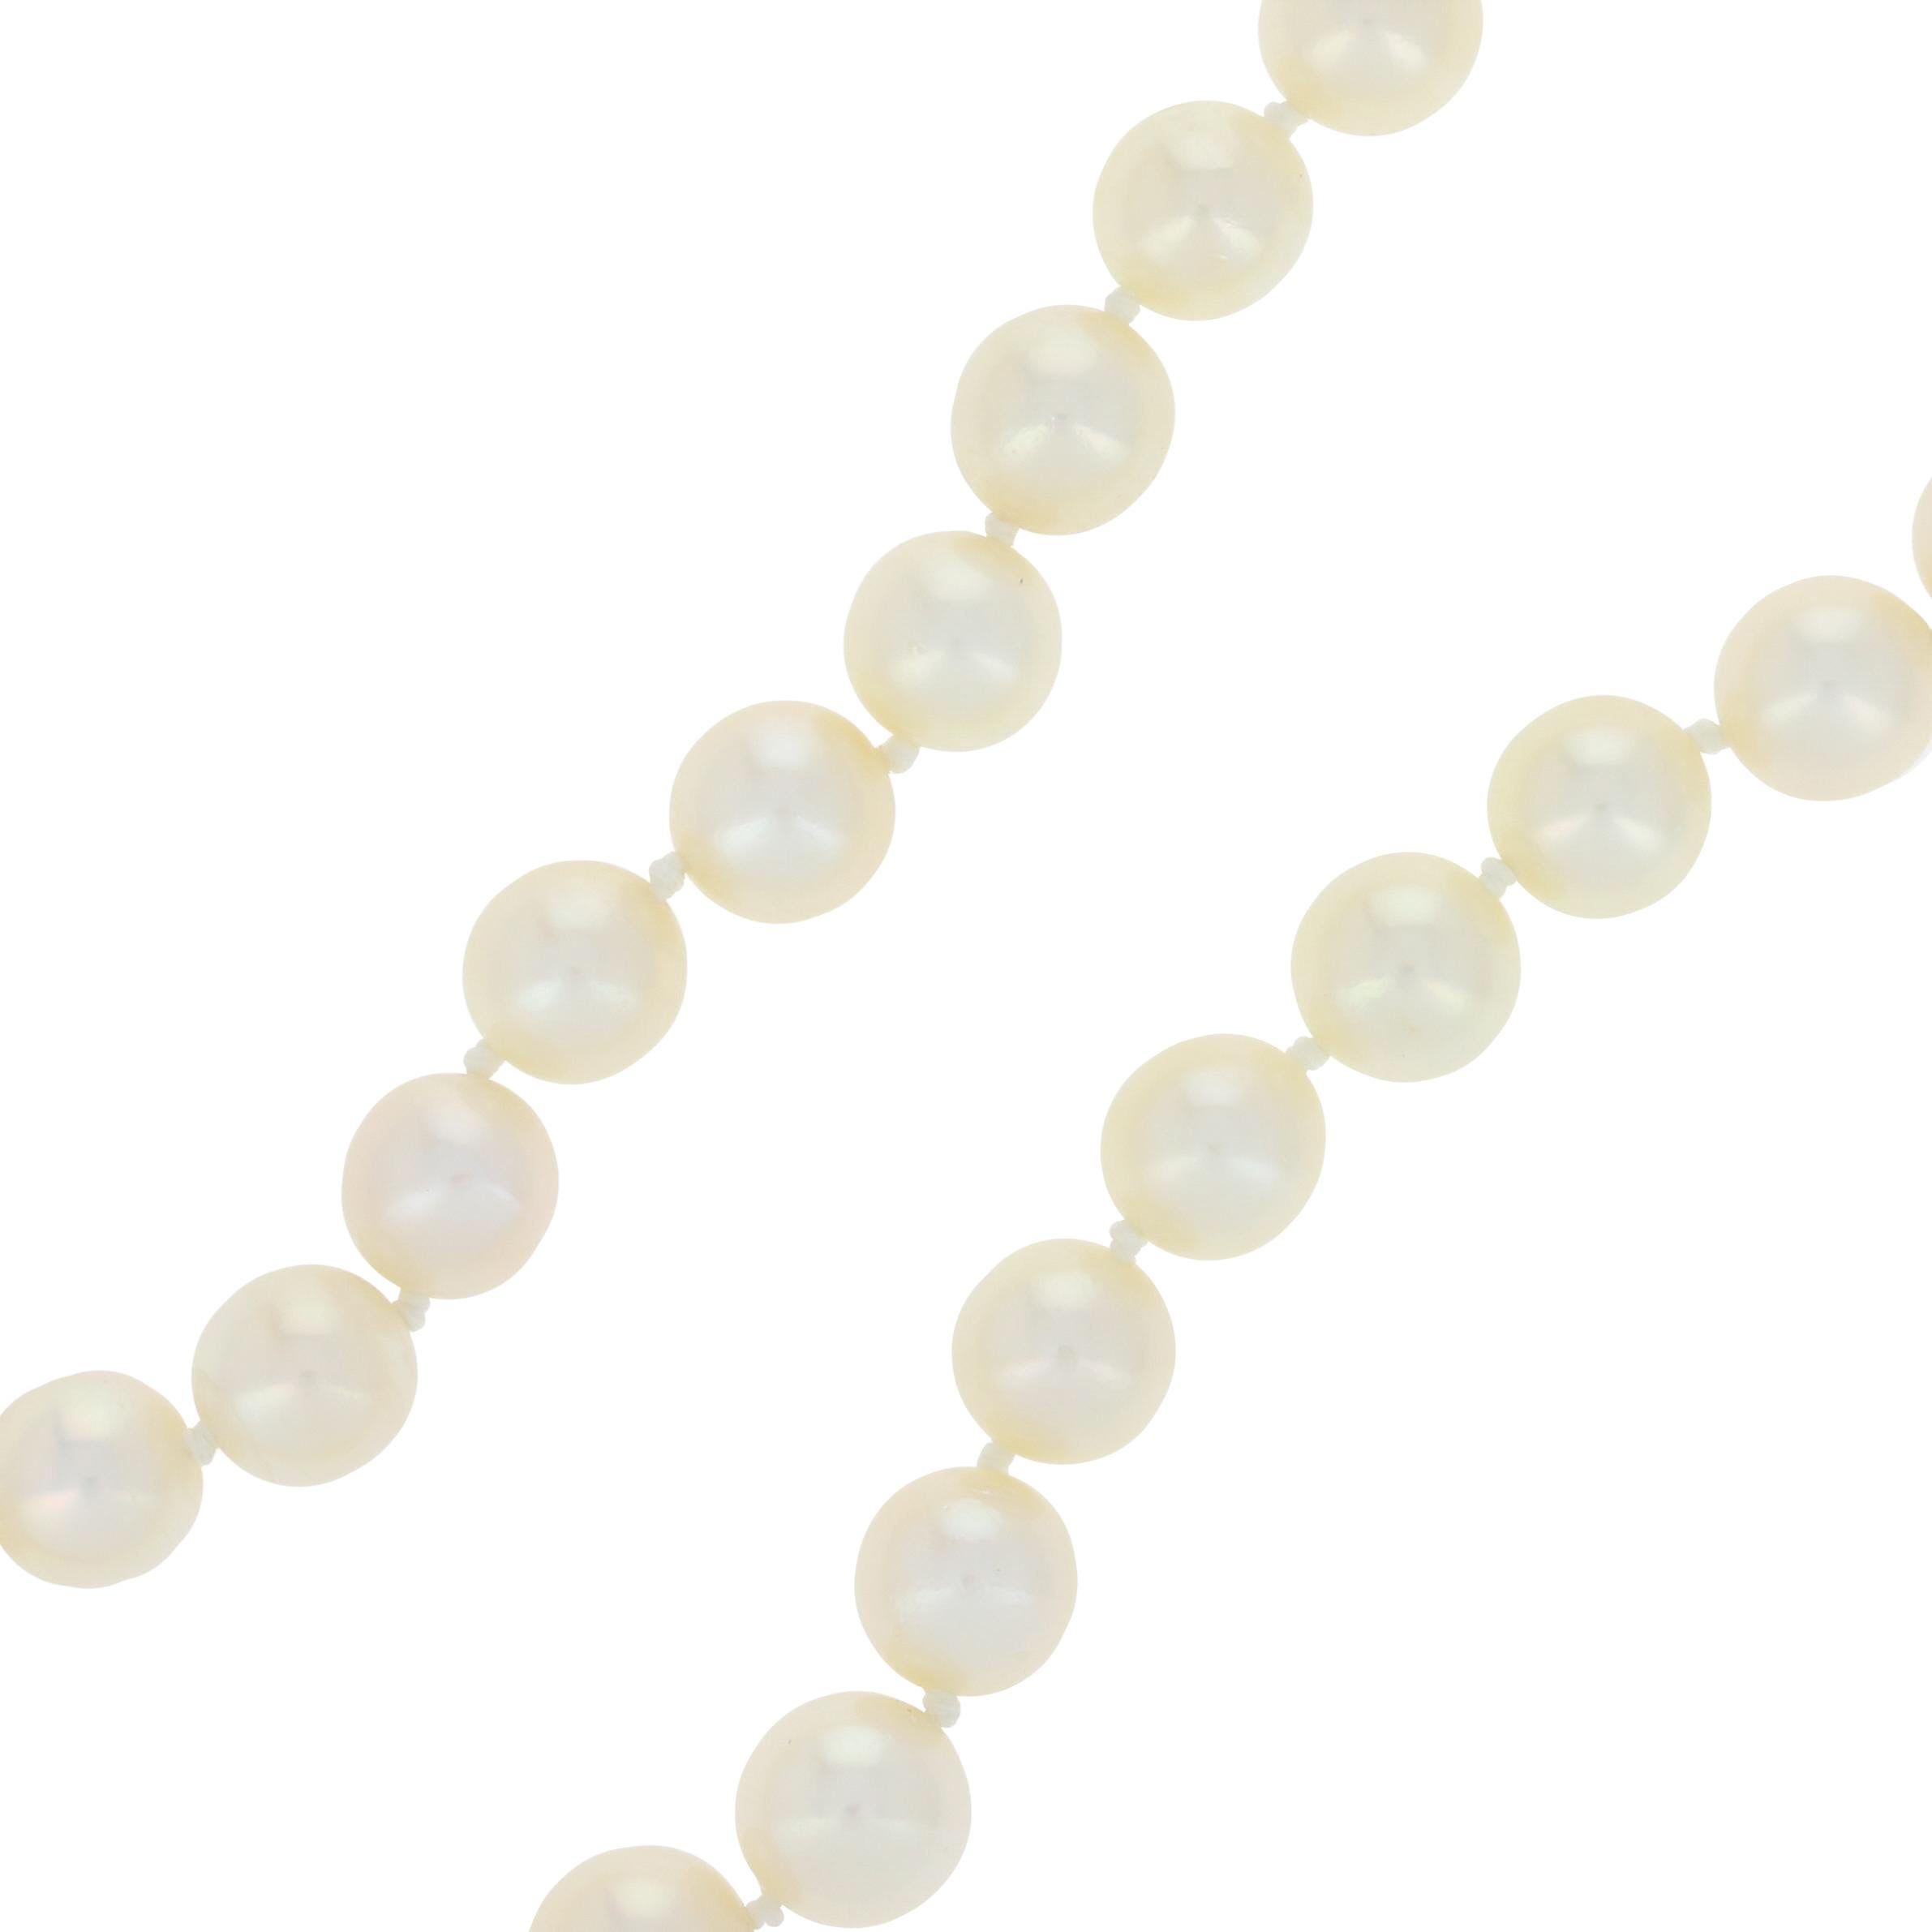 Bead Cultured Pearl Necklace 14k White Gold Knotted Strand